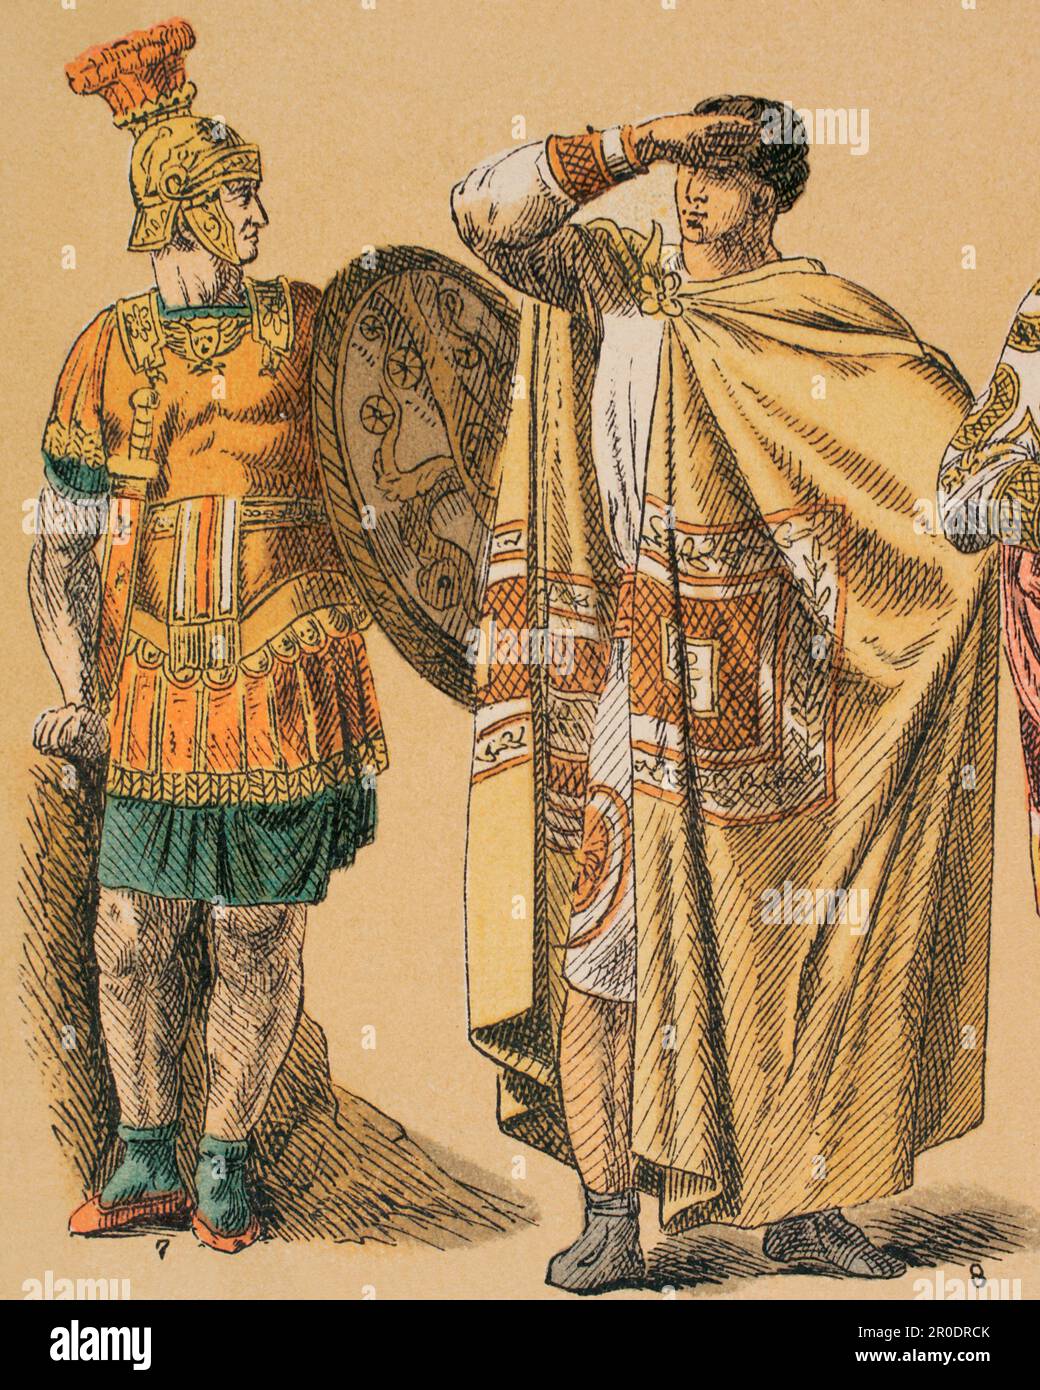 Roman Age. From left to right: 7- Roman emperor or general-in-chief, 8- high-ranking Byzantine costume. Chromolithography. 'Historia Universal', by César Cantú. Volume II, 1881. Stock Photo